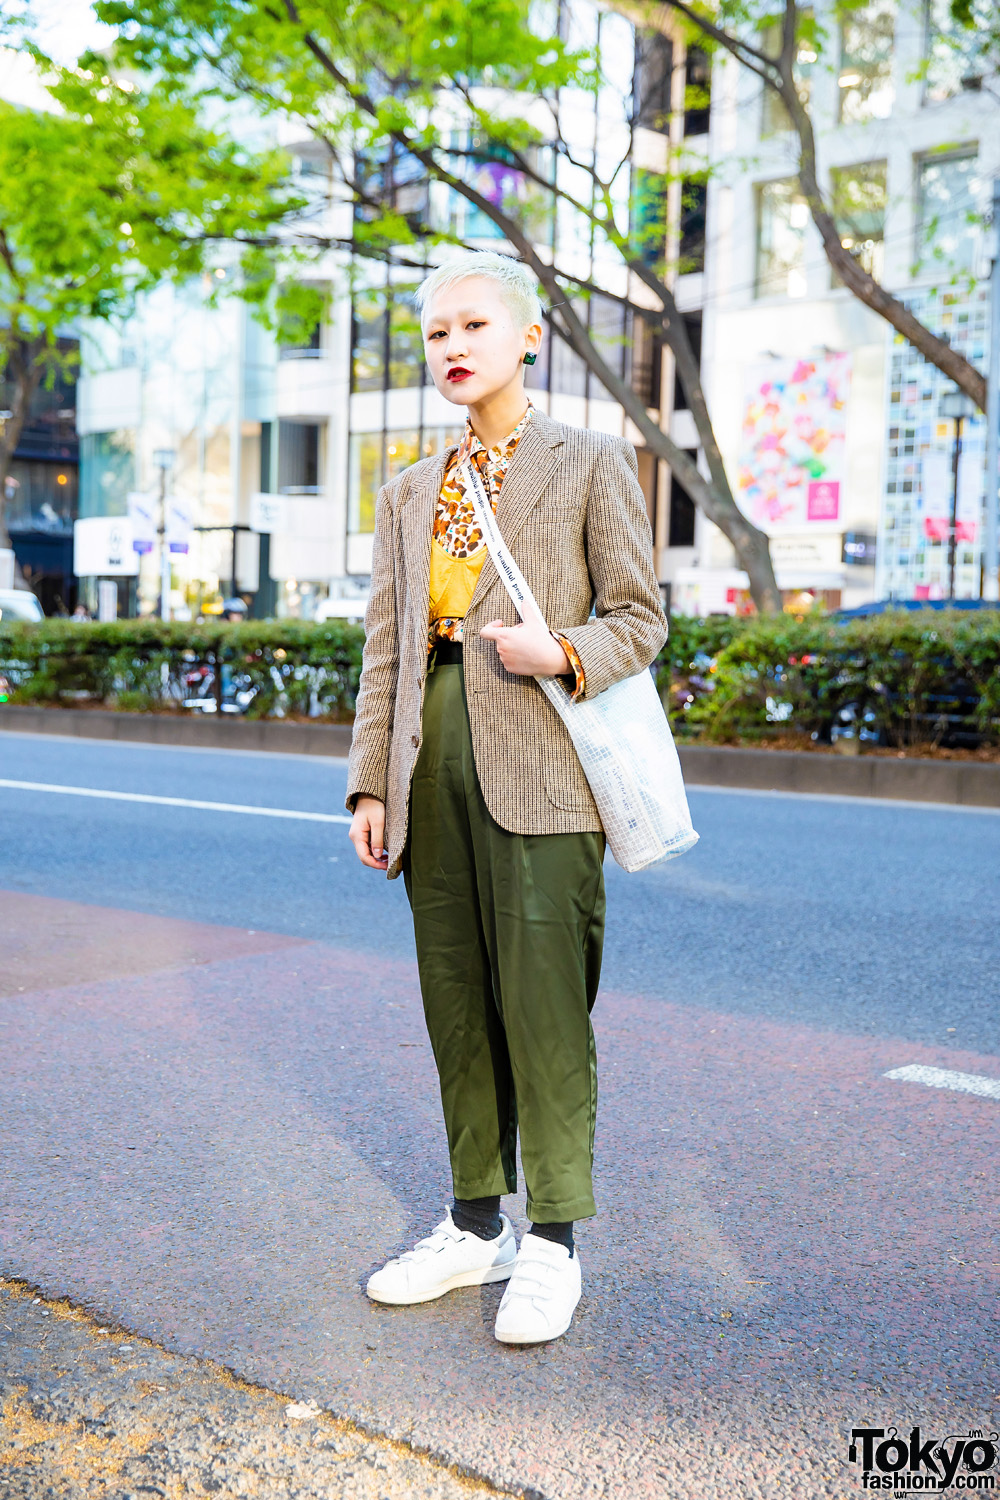 Retro Vintage Street Style in Harajuku w/ Shaved Hairstyle, Textured Coat, Bralette, Satin Pants, Beautiful People Tote & Adidas Sneakers